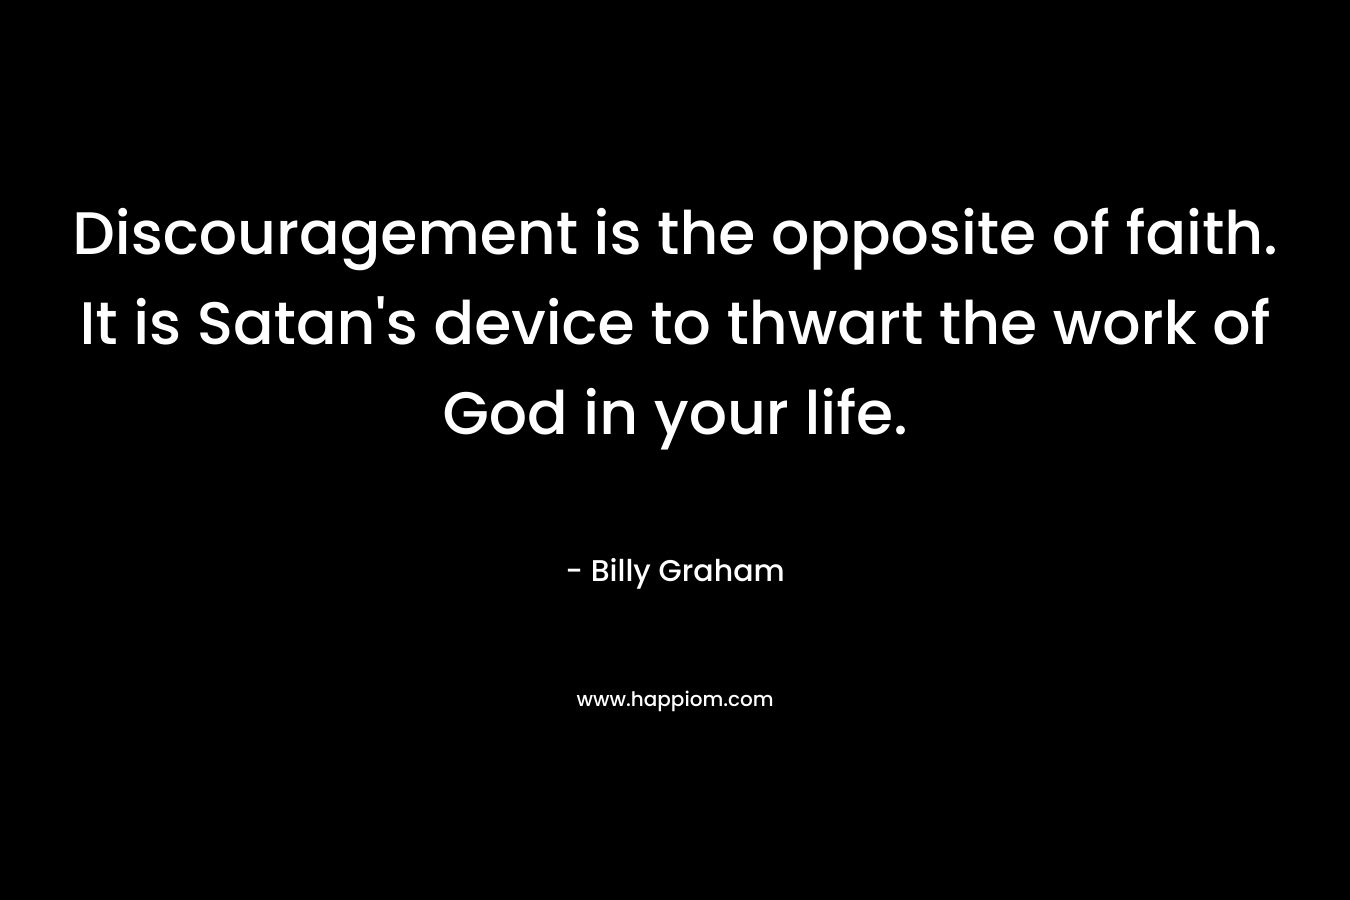 Discouragement is the opposite of faith. It is Satan’s device to thwart the work of God in your life. – Billy Graham